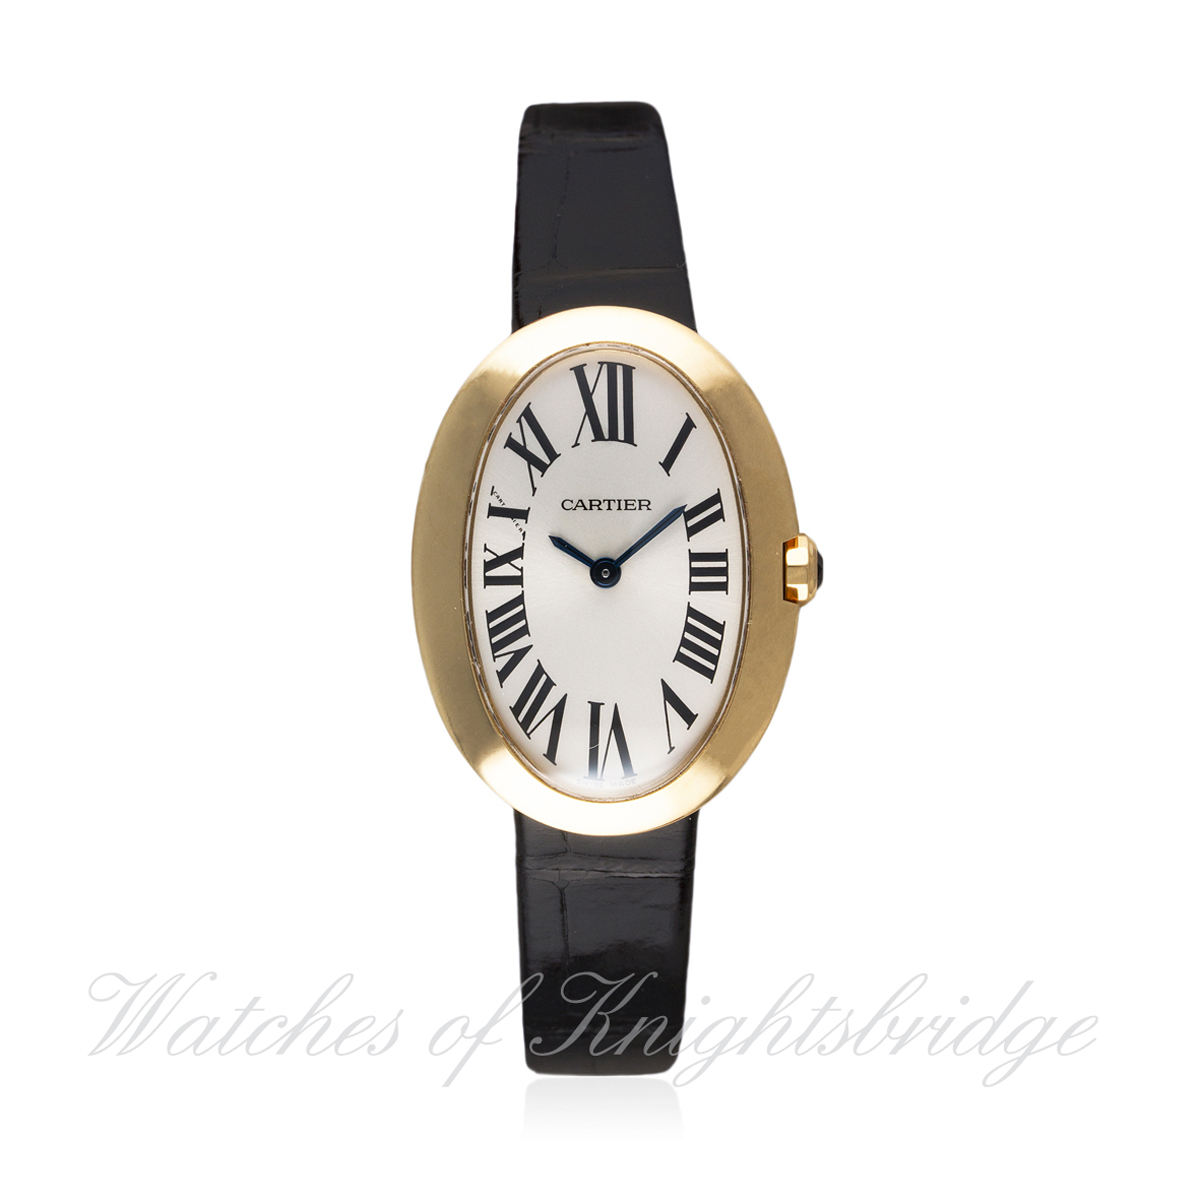 A LADIES 18K SOLID GOLD CARTIER BAIGNOIRE WRIST WATCH CIRCA 2010  D: Silver dial with Roman